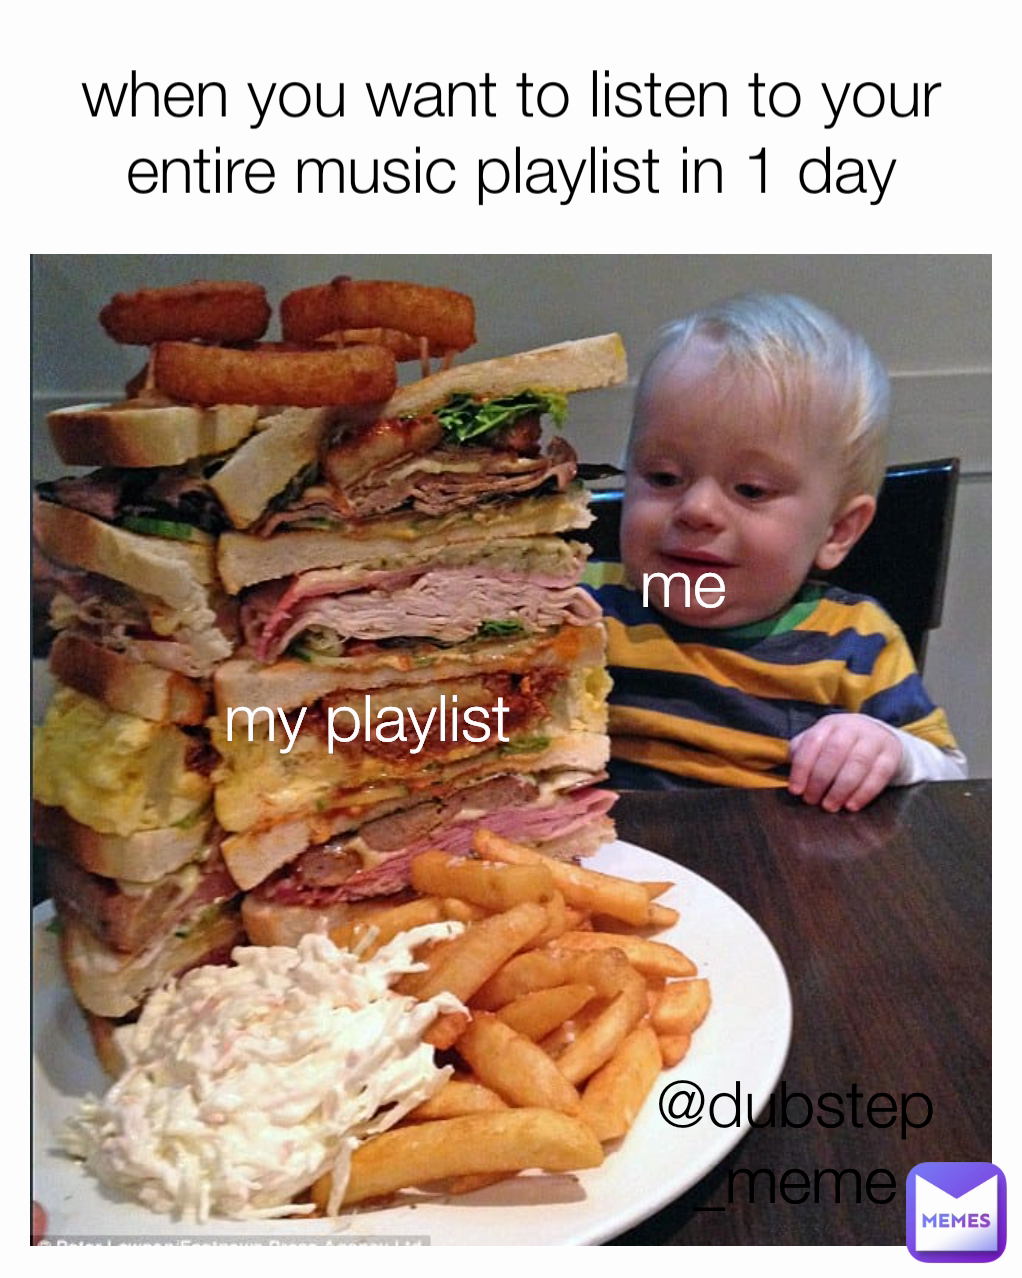 me @dubstep_meme when you want to listen to your entire music playlist in 1 day my playlist